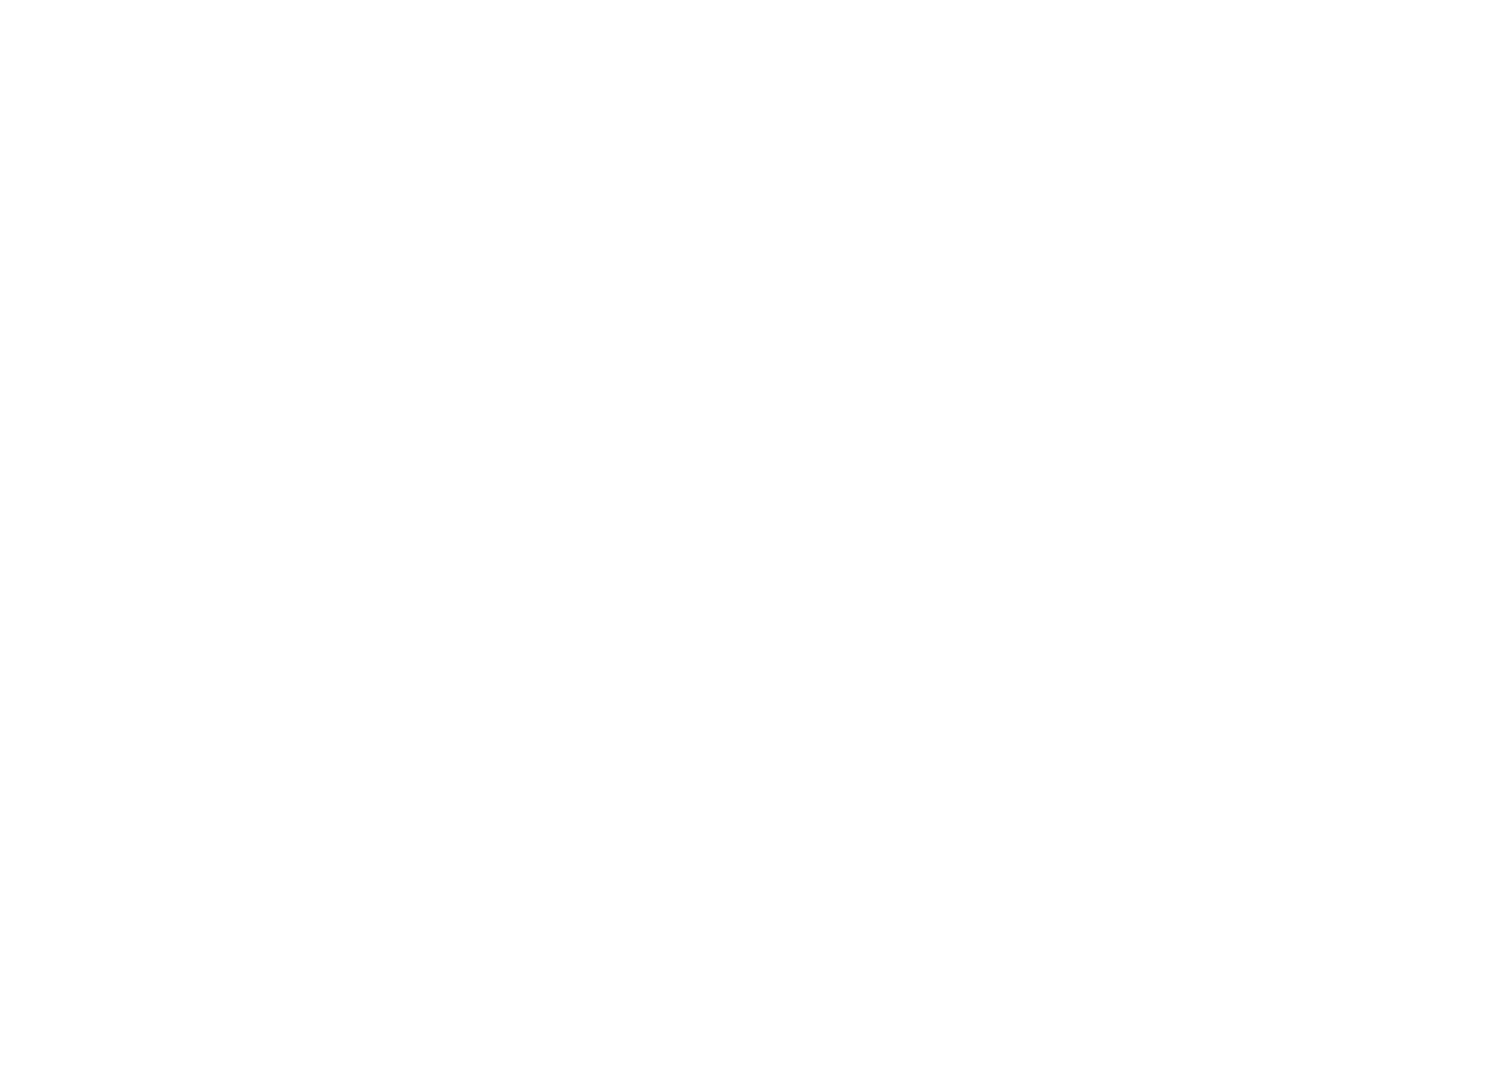 Welcome to EJ Foods NW